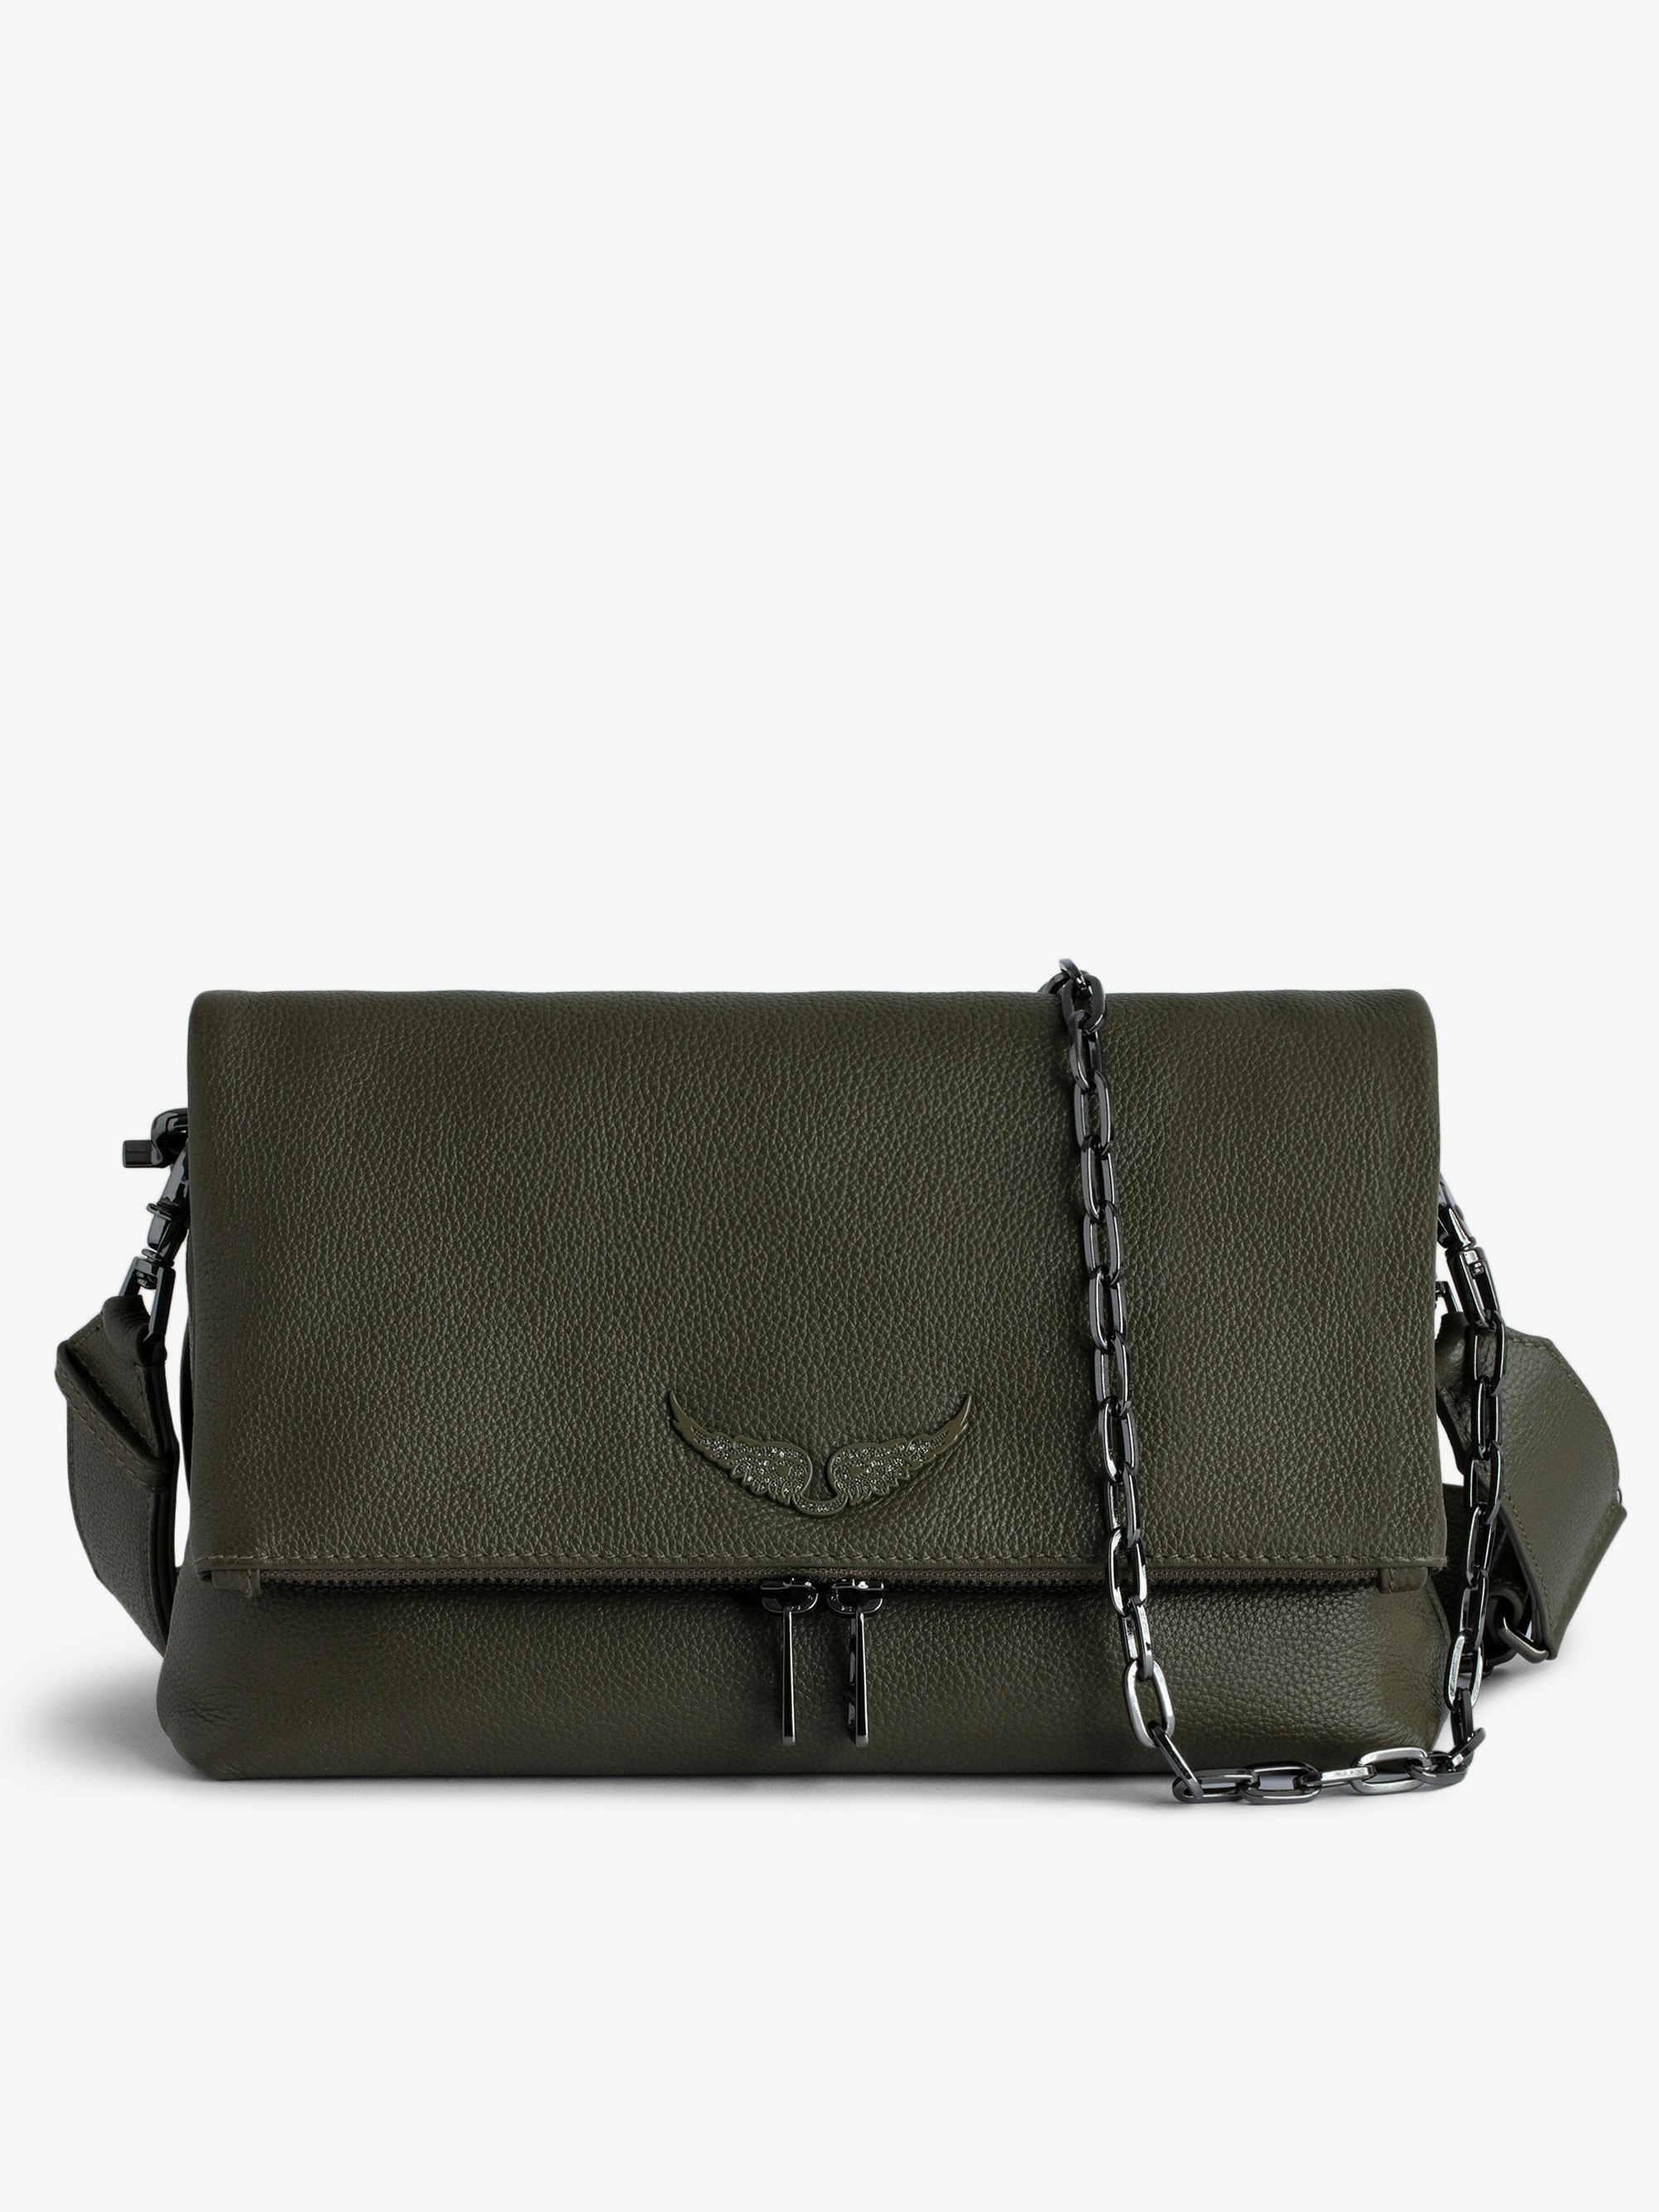 Rocky Bag - Women’s khaki grained leather bag with shoulder strap and wings signature.